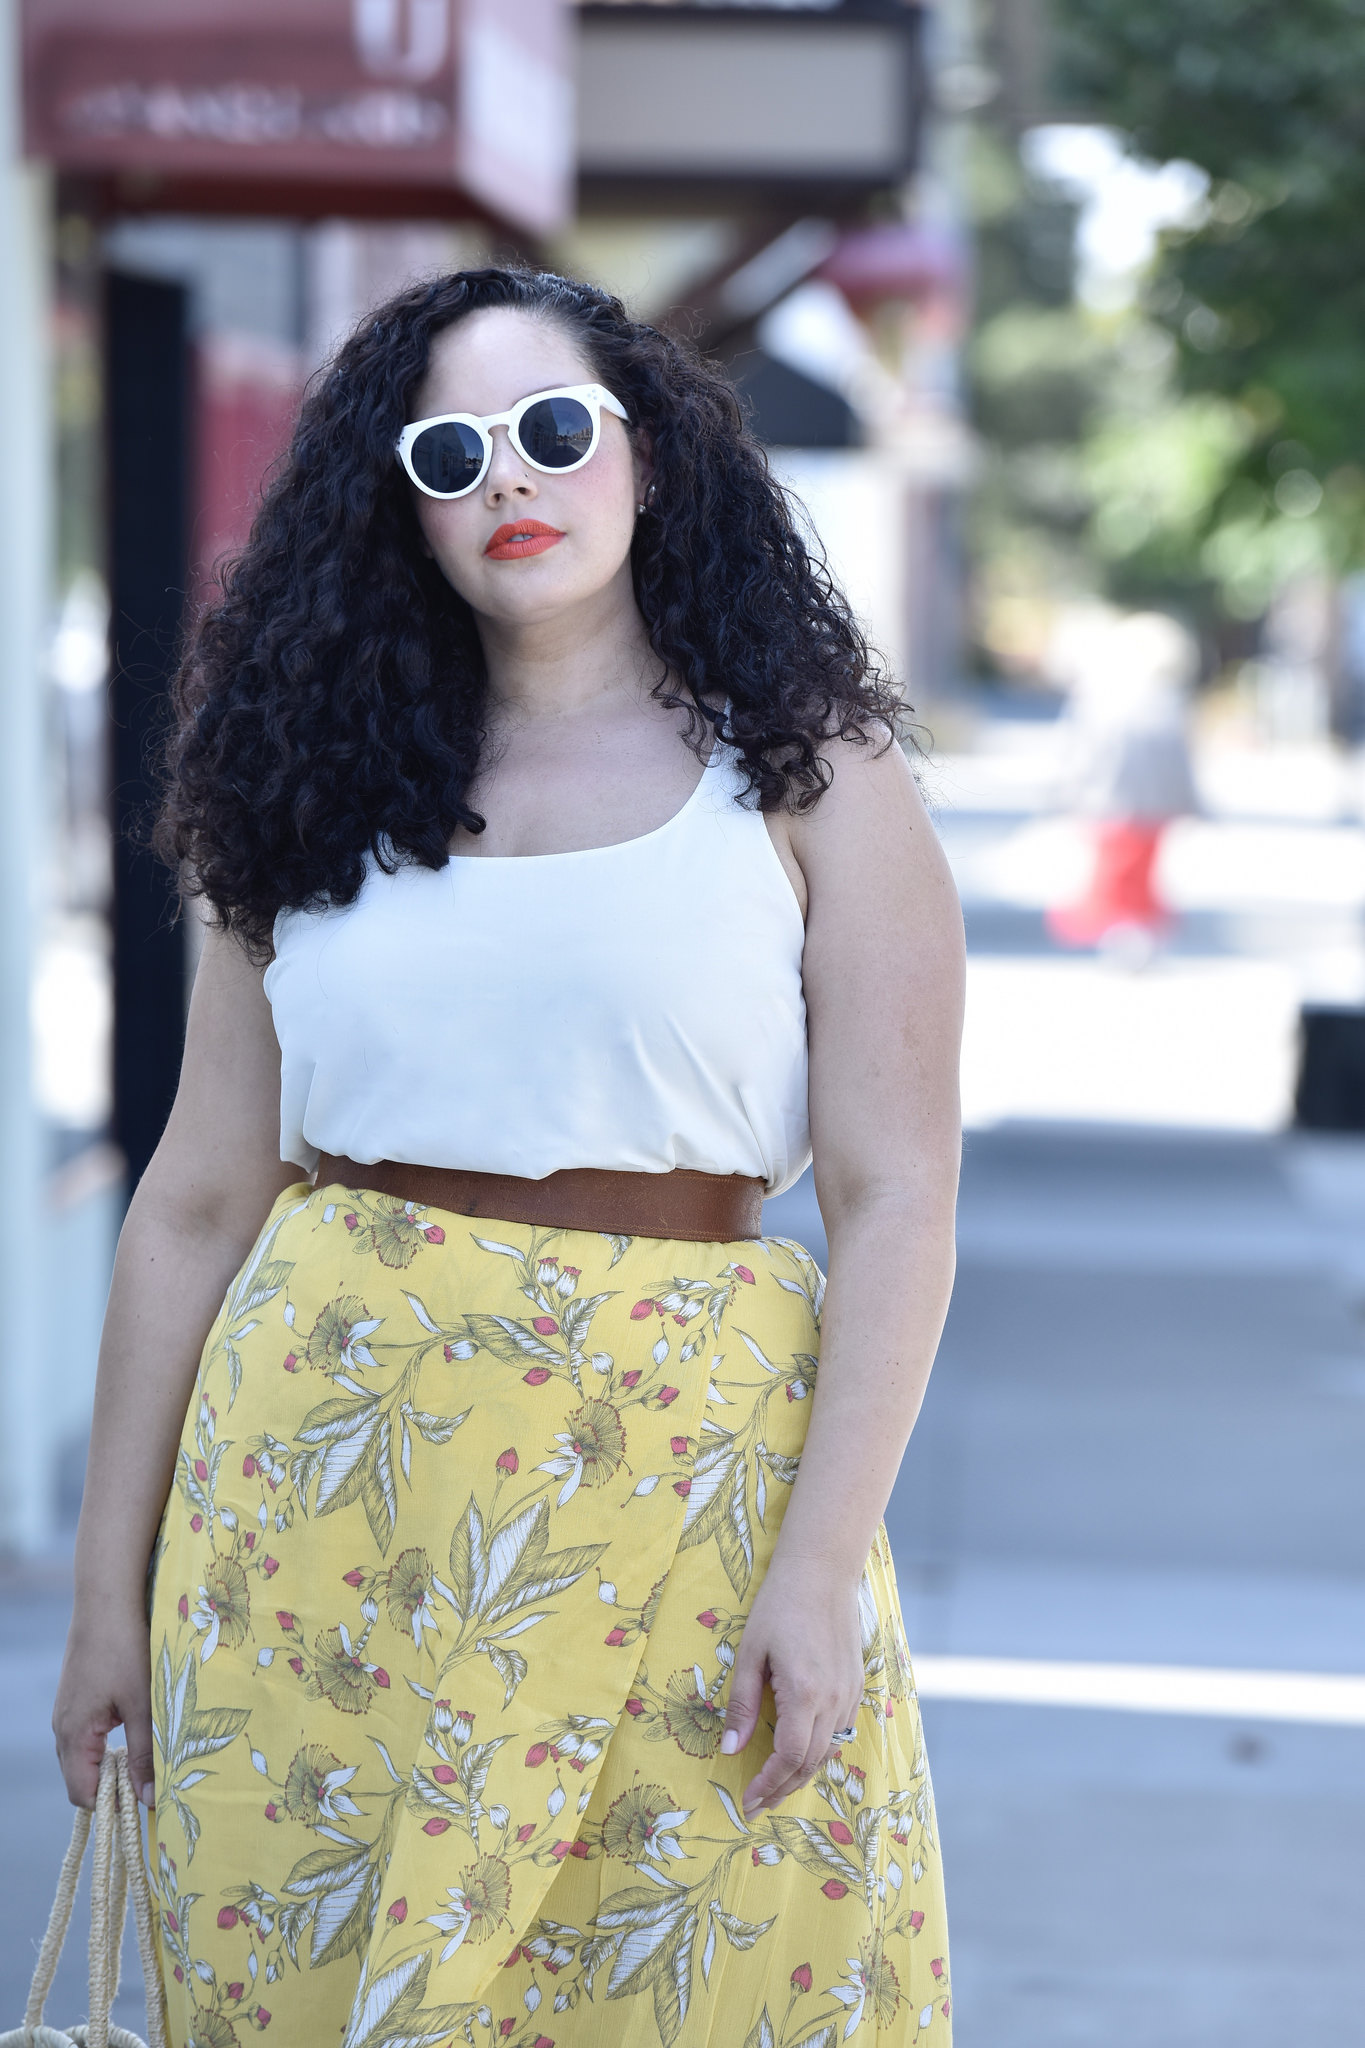 The Must Have Skirt Of The Season Via @GirlWithCurves #fashion #outfits #style